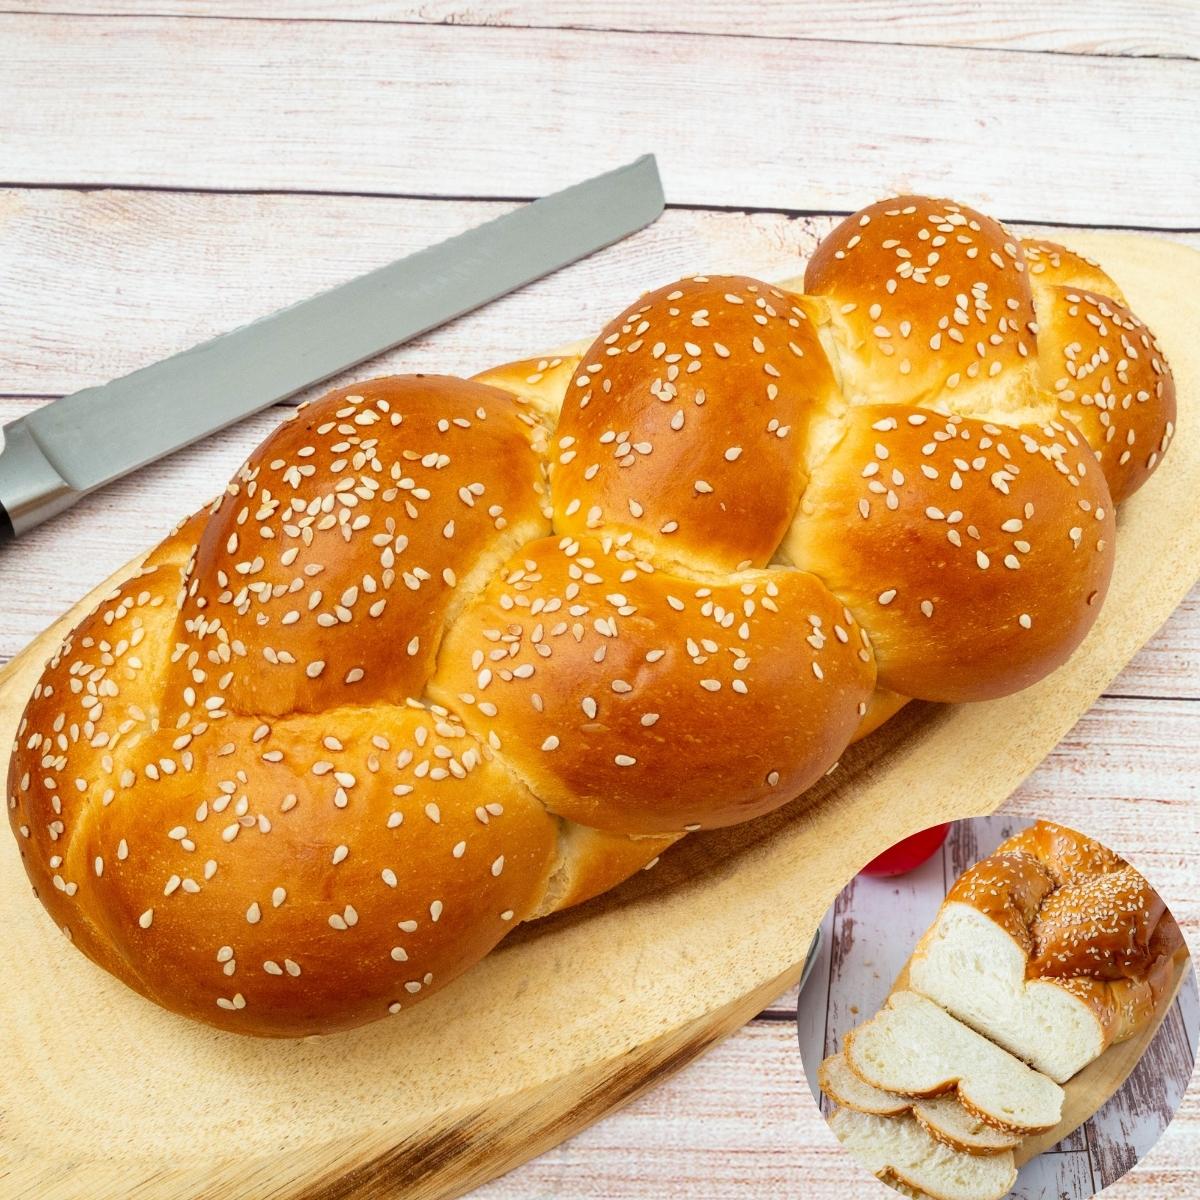 A four braid challah on a wooden board.